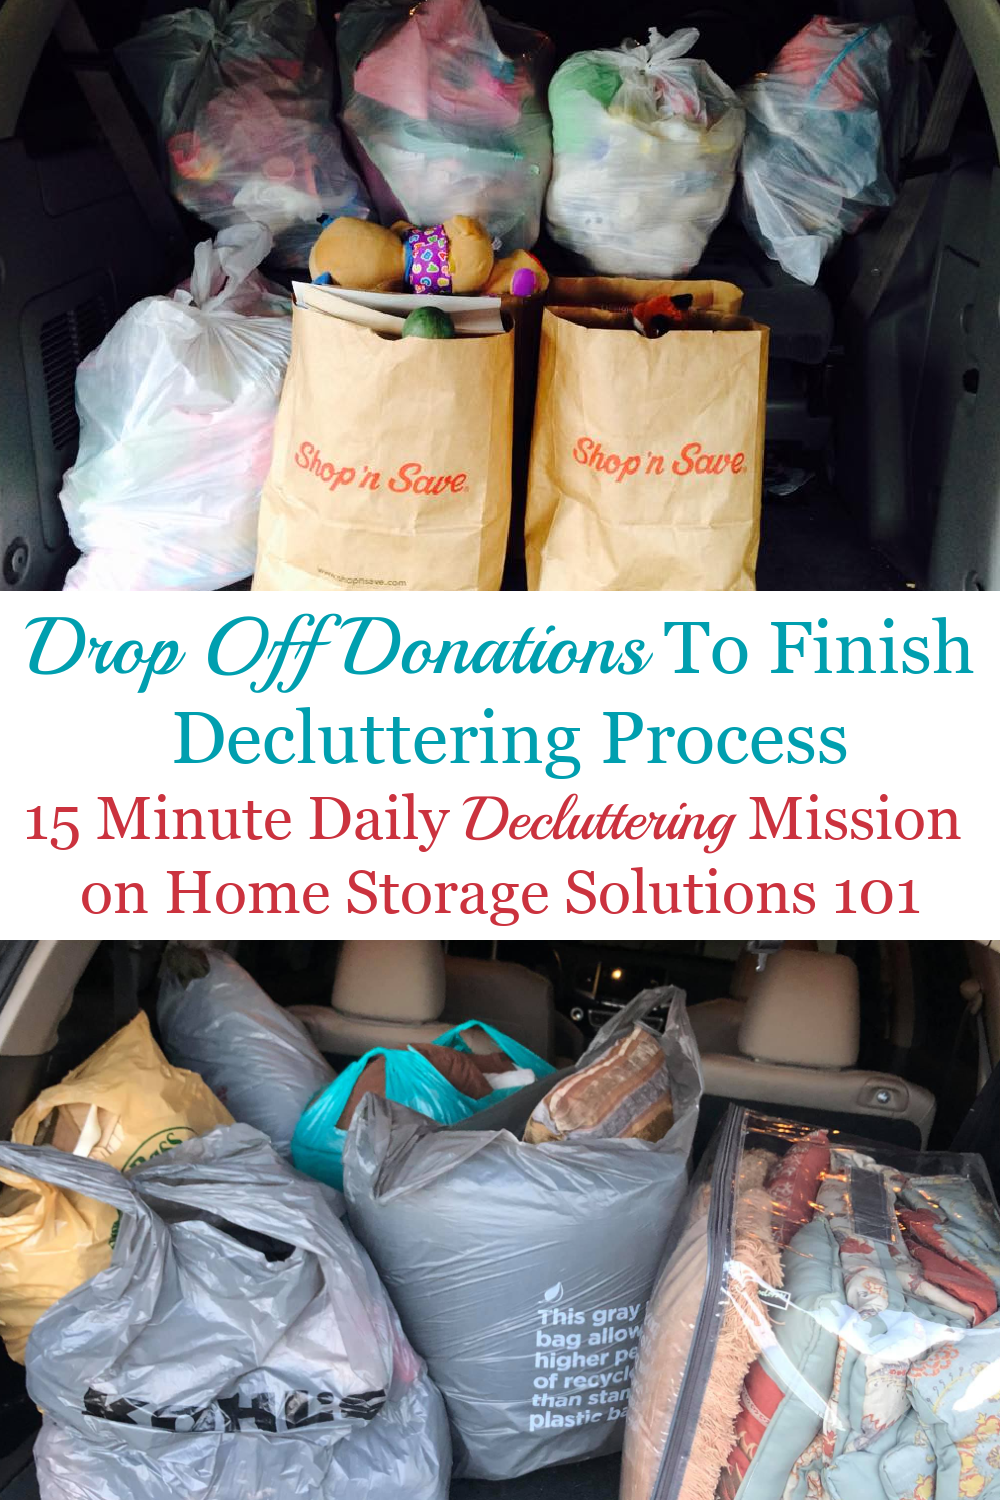 In this Declutter 365 mission I want you to drop off donations to a charity or donation center, to finish the task of decluttering items around your home that you've identified as clutter, and that you wish to give away to others {on Home Storage Solutions 101} #Declutter365 #DropOffDonations #DonateClutter